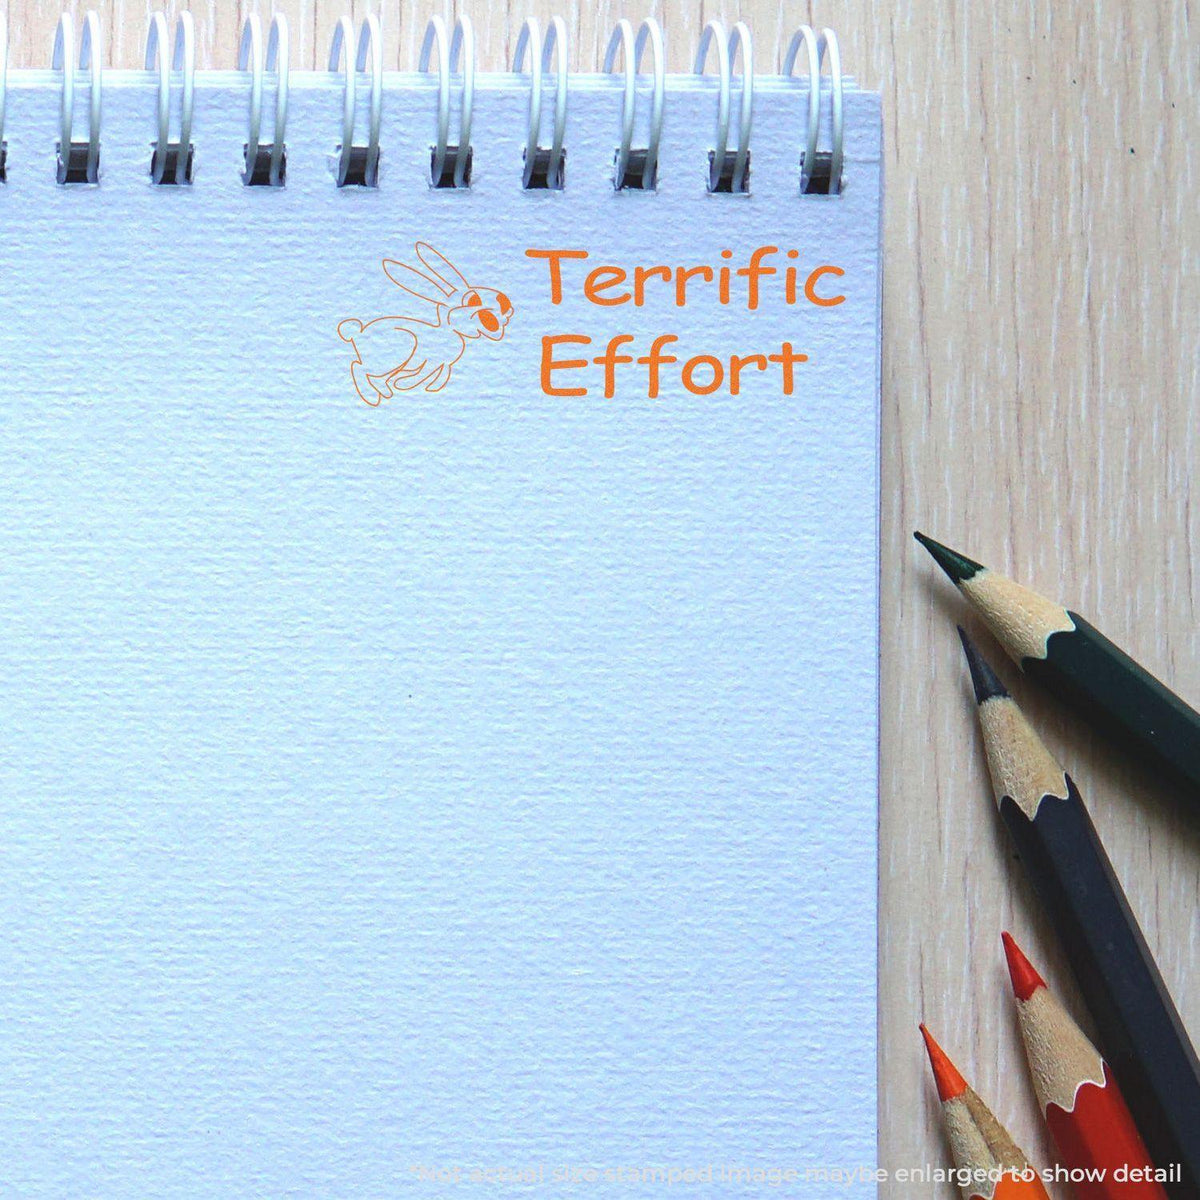 In Use Terrific Effort Rubber Stamp Image